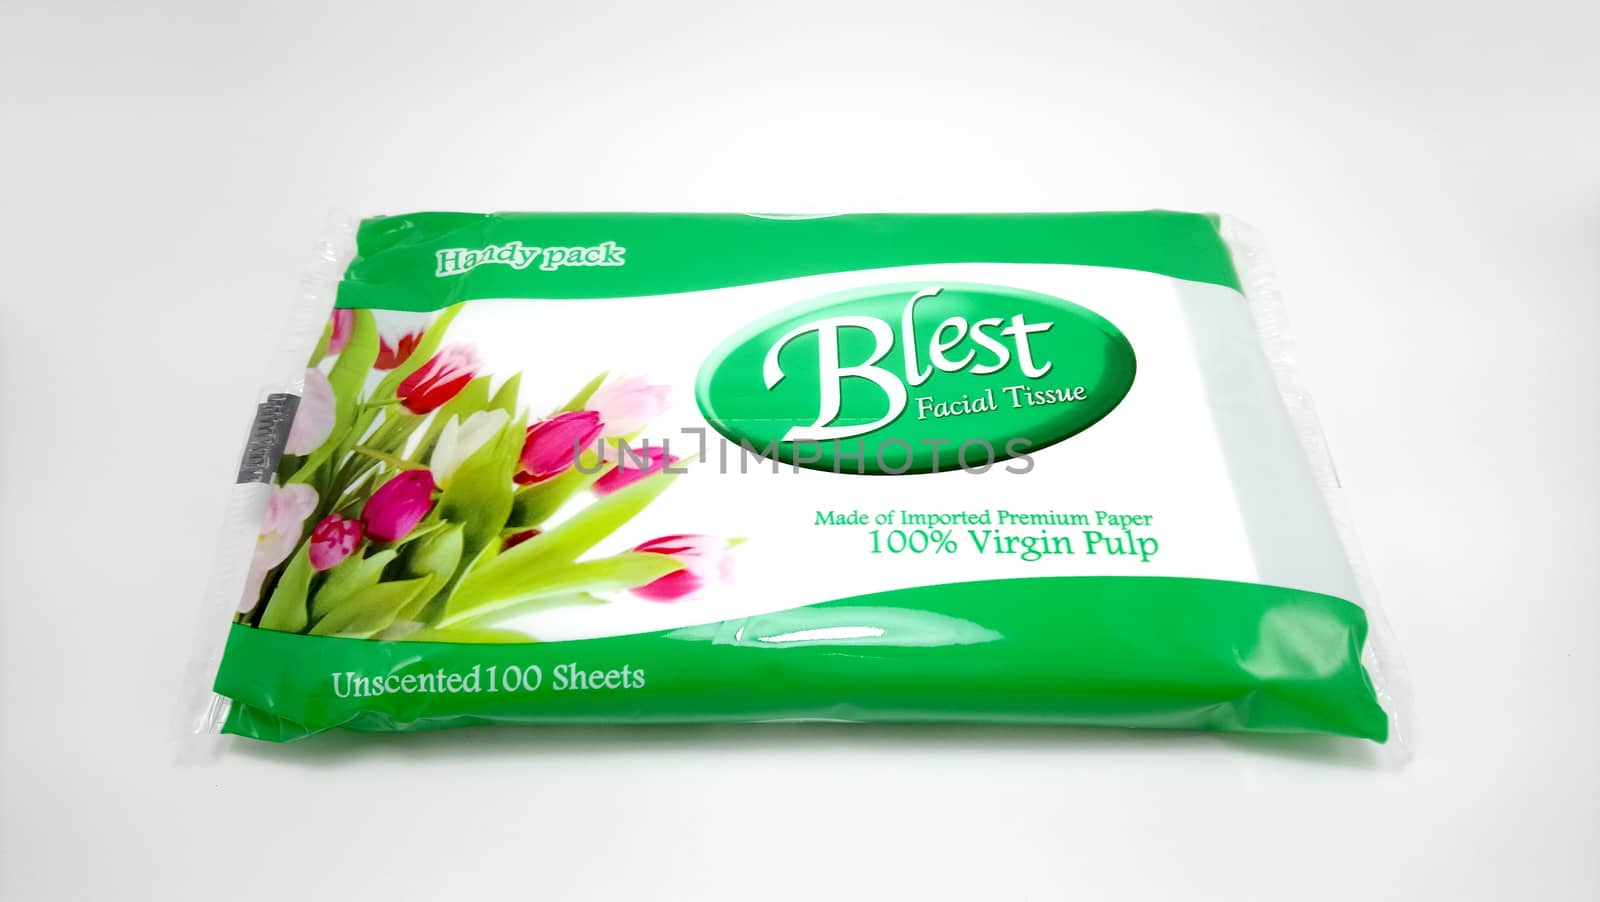 Blest facial tissue paper in Manila, Philippines by imwaltersy